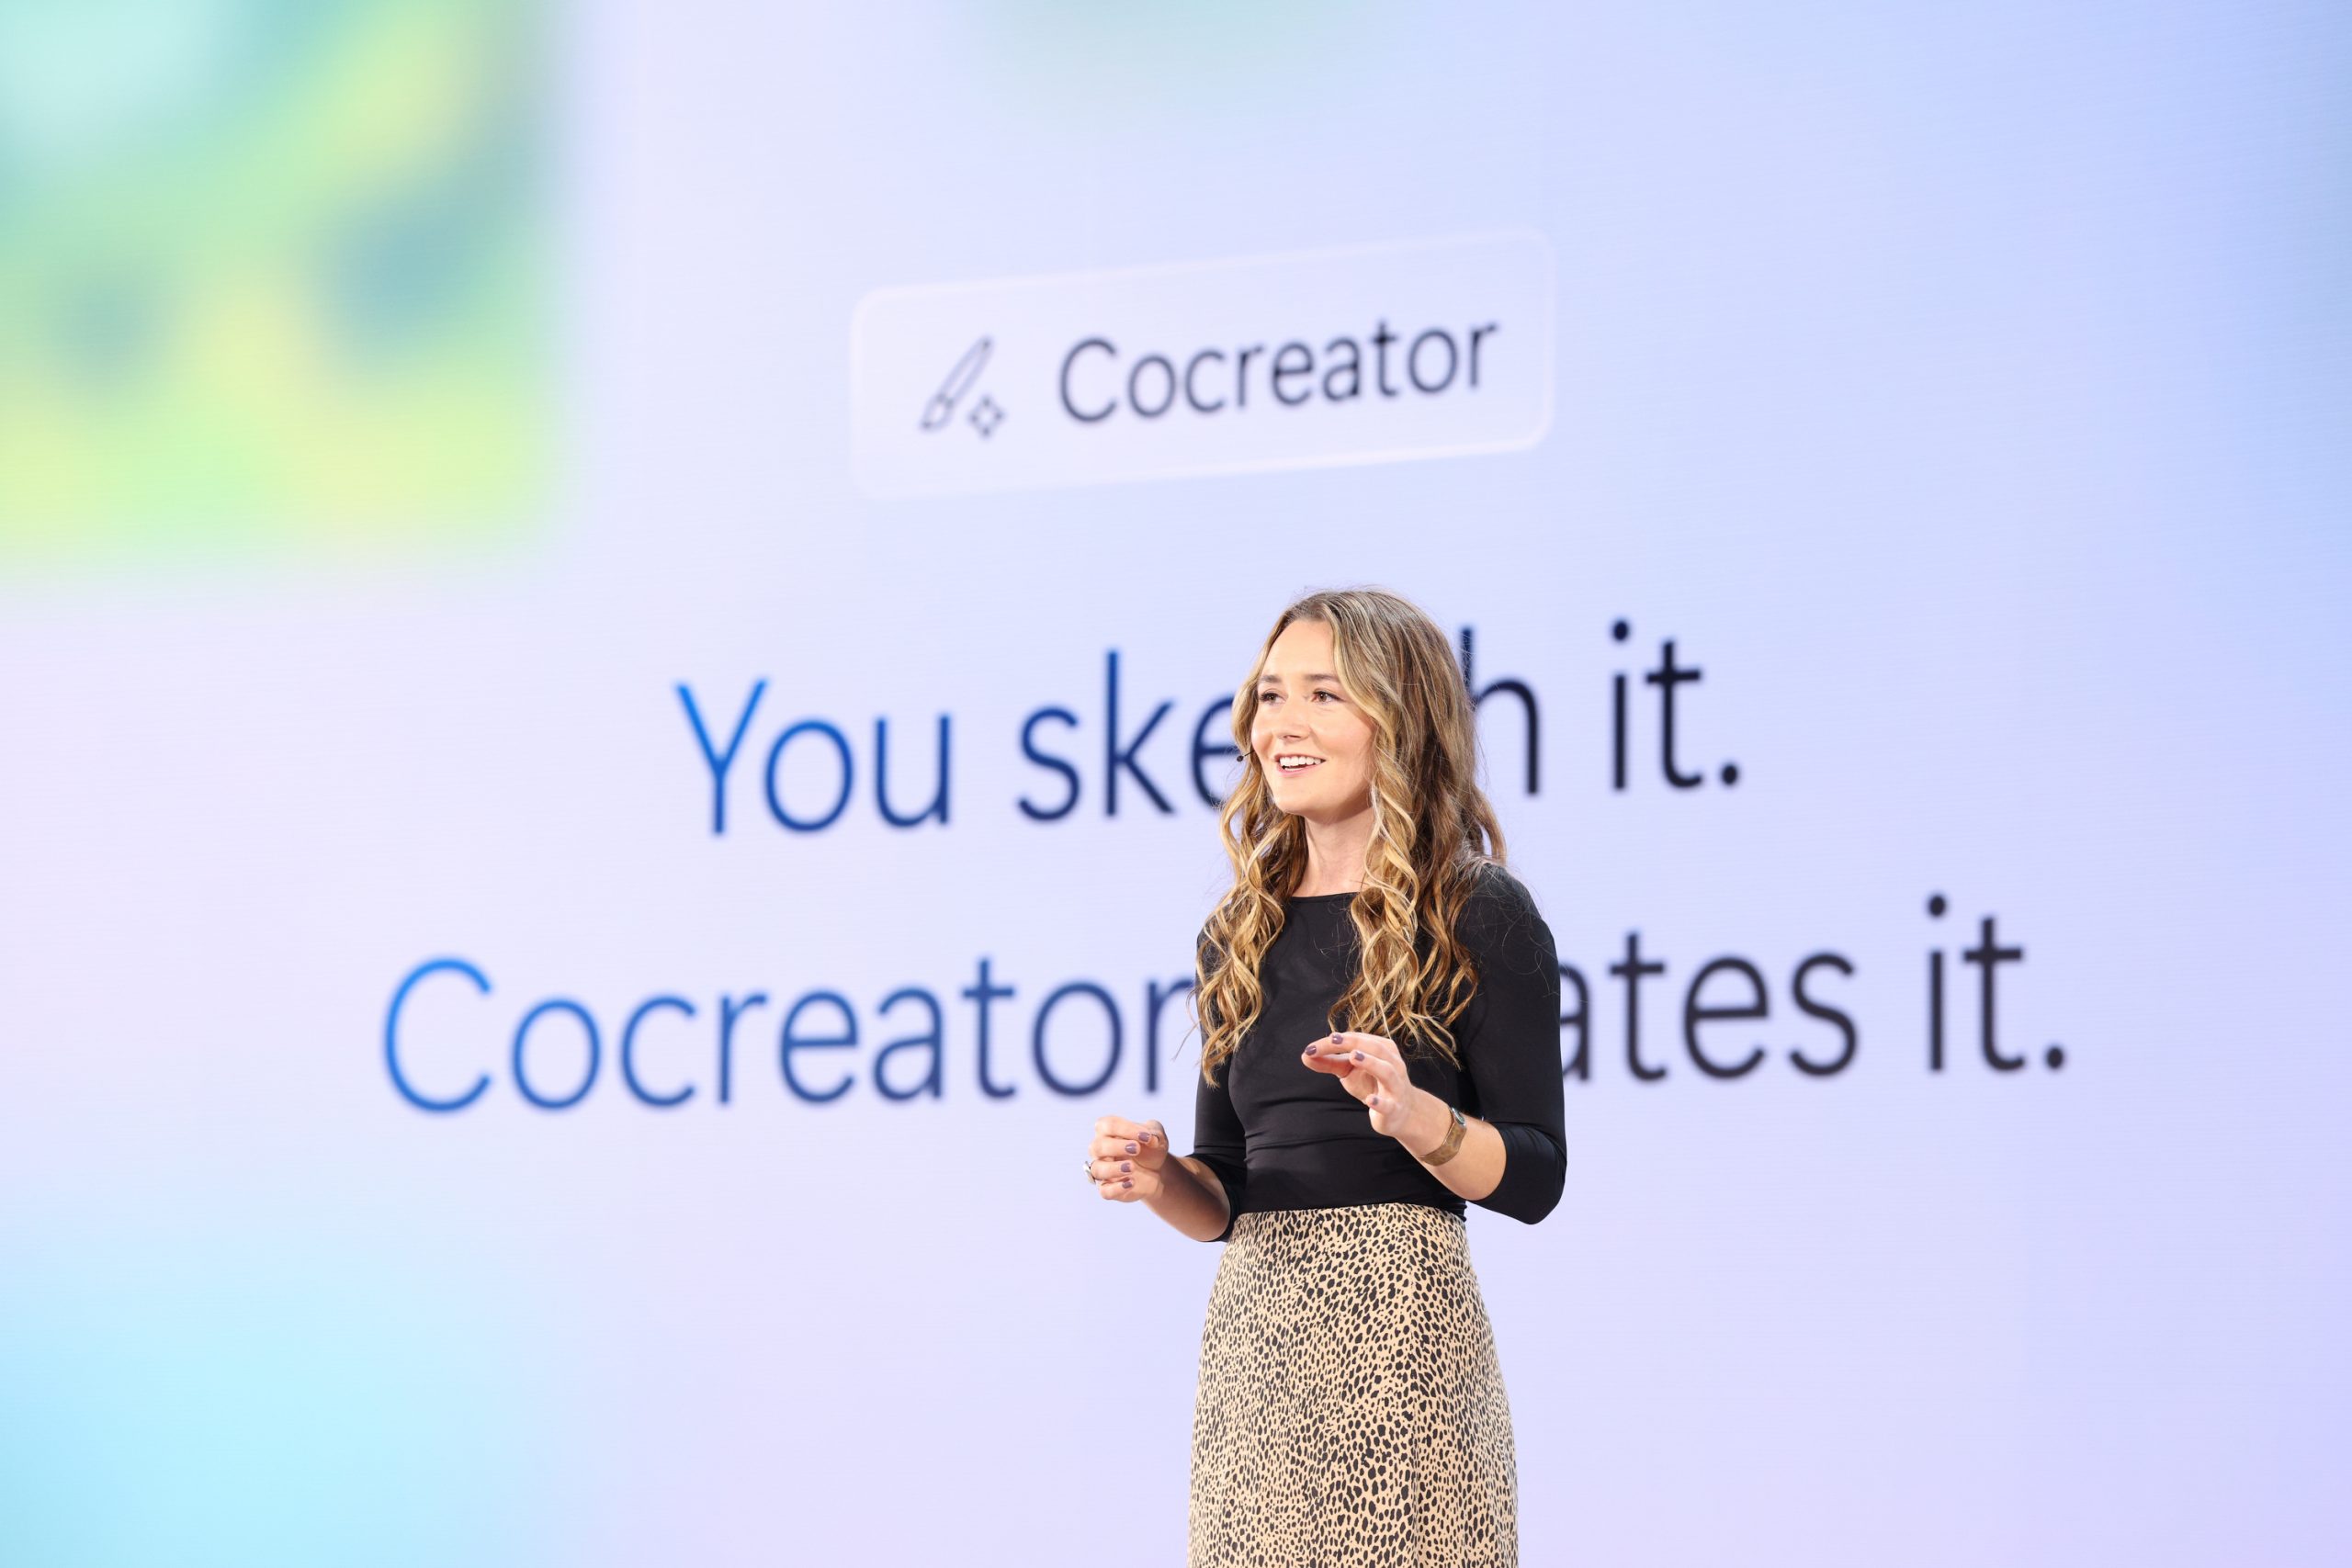 A woman standing on stage in front of an audience with the Cocreator logo and tagline on the screen behind her